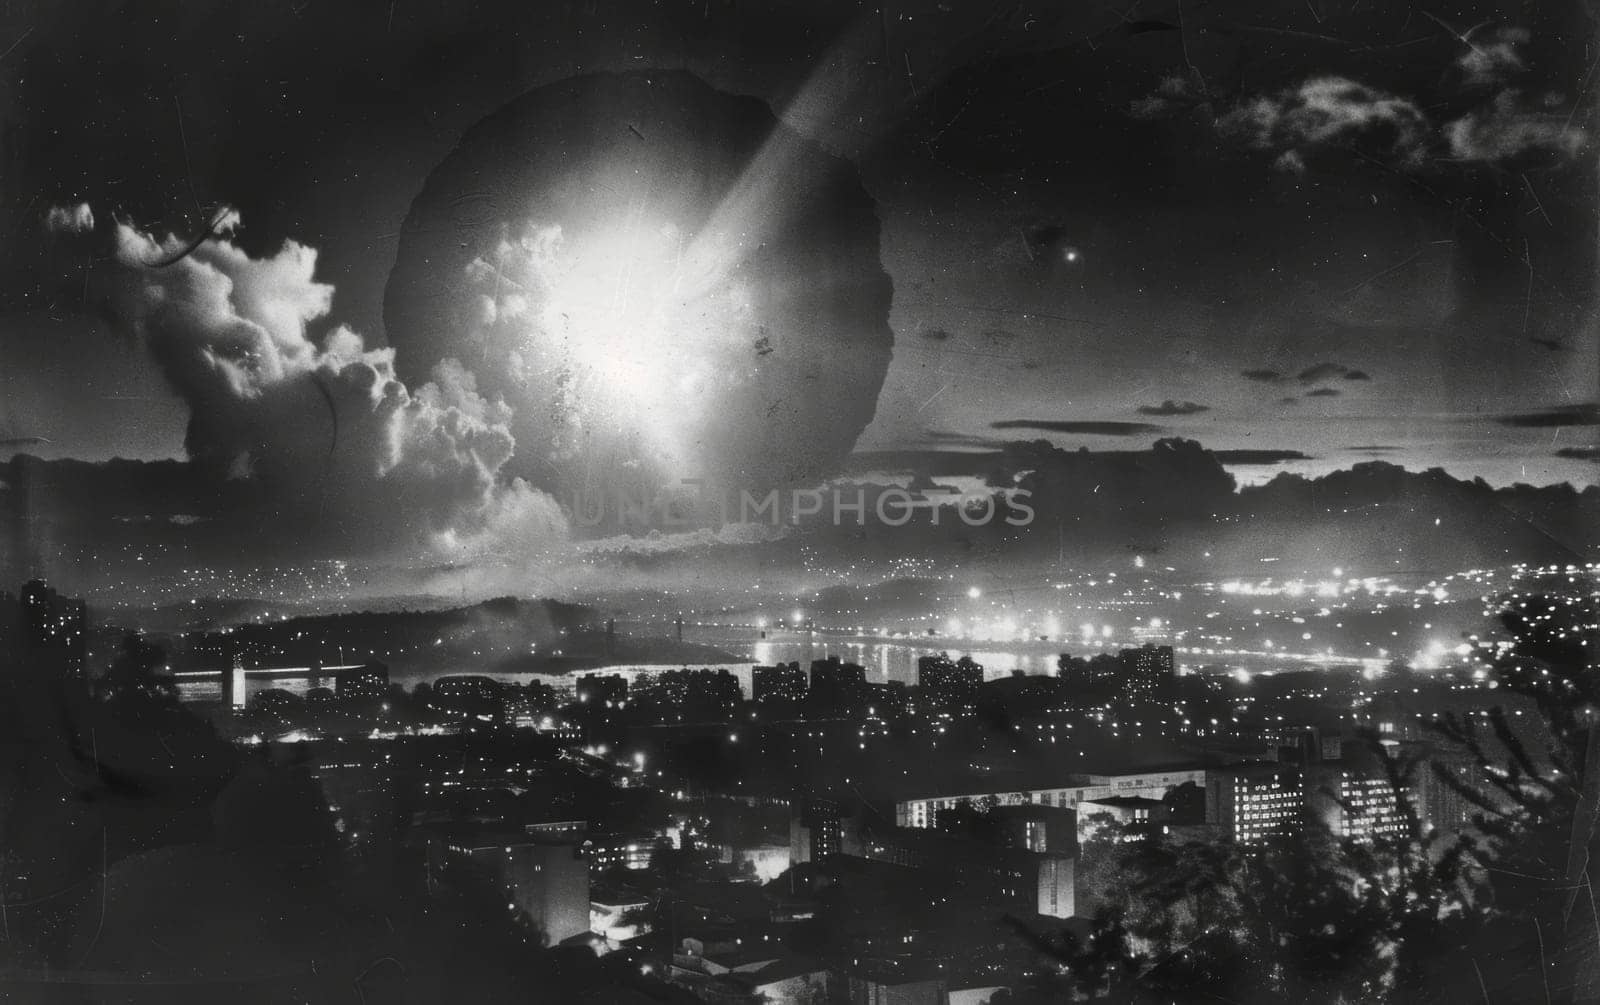 A vintage black and white photo captures a dramatic explosion illuminating the night sky over a cityscape, evoking a sense of historical drama and urgency.. by sfinks